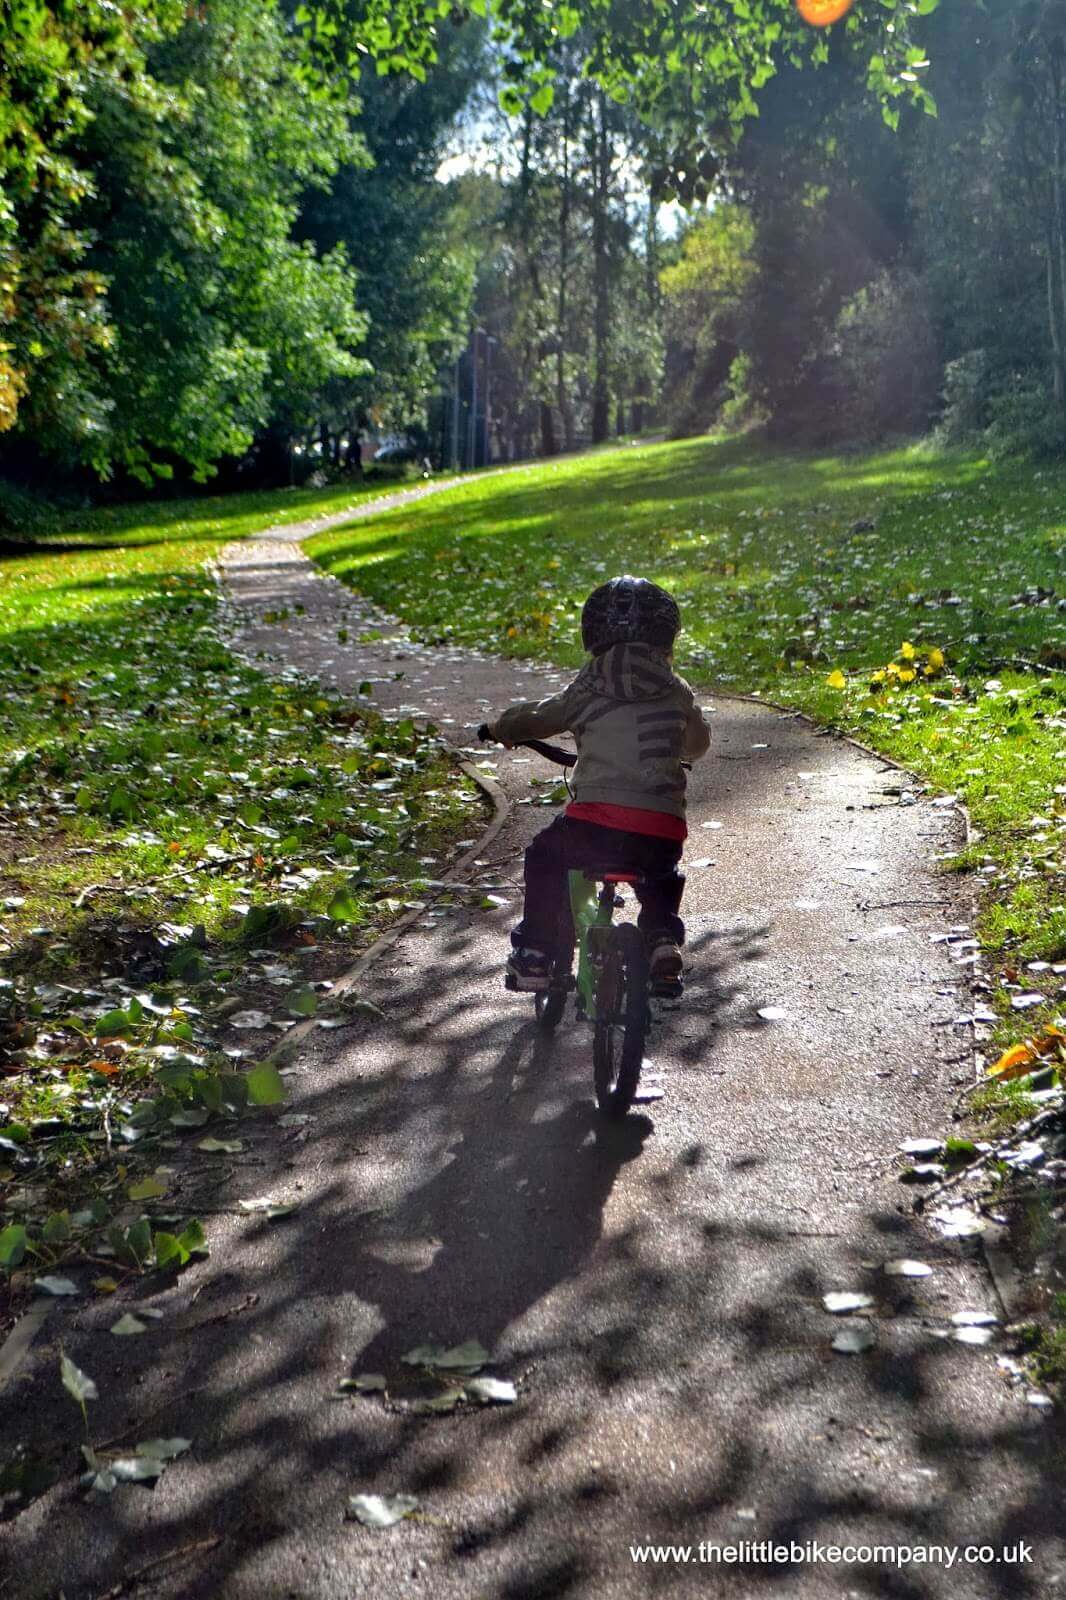 Child riding a bike without stabilisers